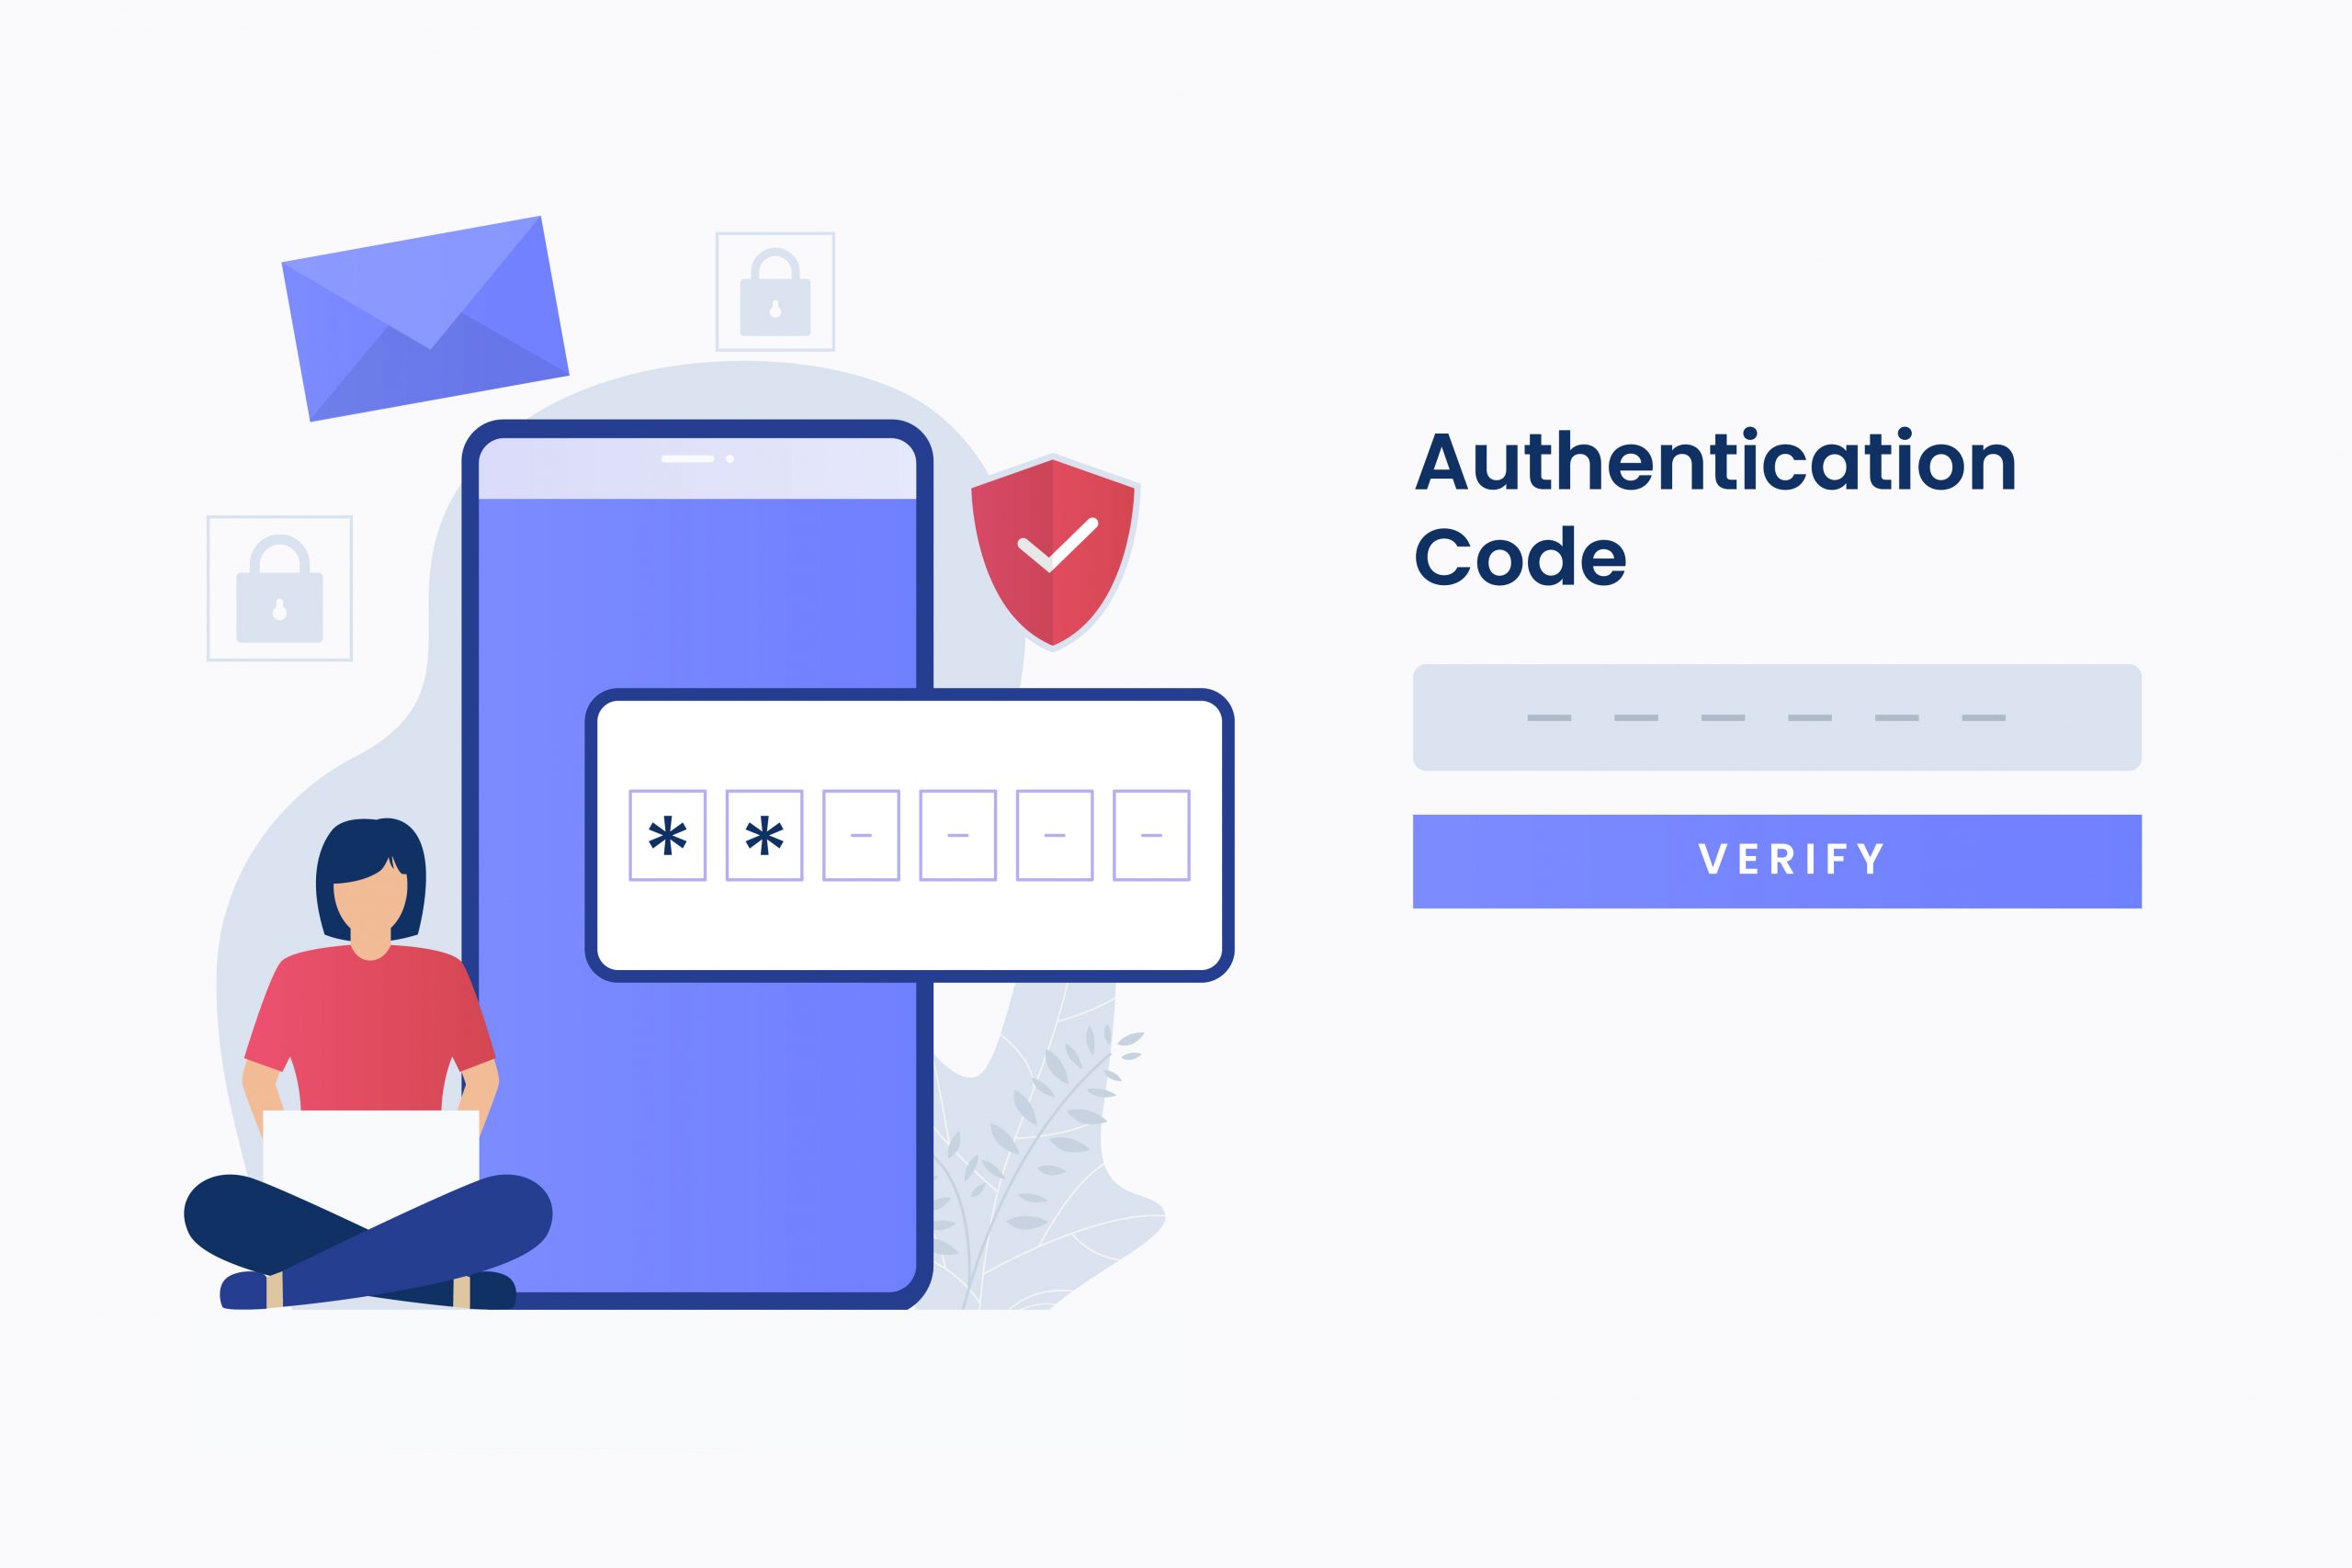 Implementing Two-Factor Authentication: Strengthen security by combining password-based authentication with an additional layer of verification, such as biometrics or one-time passwords.
Regularly Updating and Patching Systems: Keep your systems up to date with the latest security patches and fixes to minimize vulnerabilities that could lead to unauthorized access attempts.